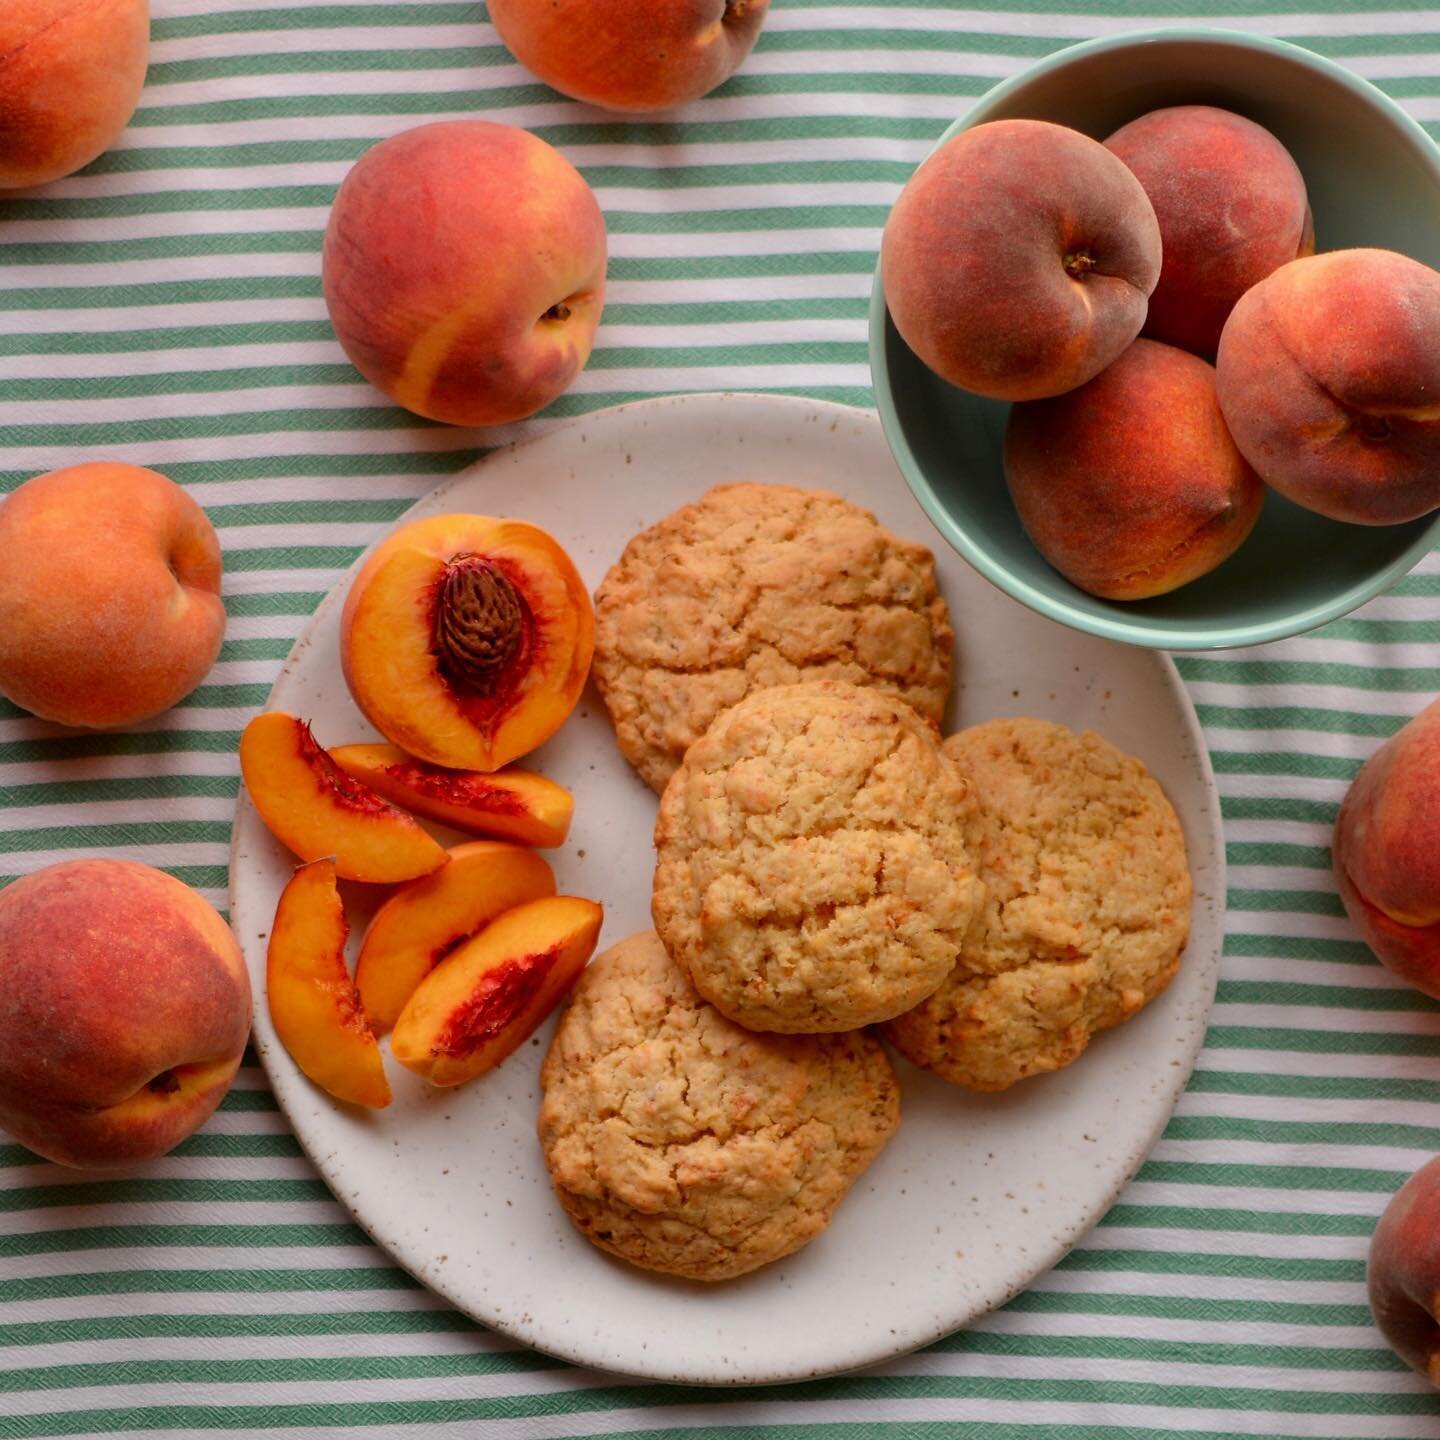 🍑New this week in our shop: Peach scones! Our version of this favorite summer fruit boasts brown sugar, buttermilk, and a hint of cinnamon that holds hands splendidly with dried peaches. We&rsquo;ve been told it tastes just like peach cobbler 😋

Fr